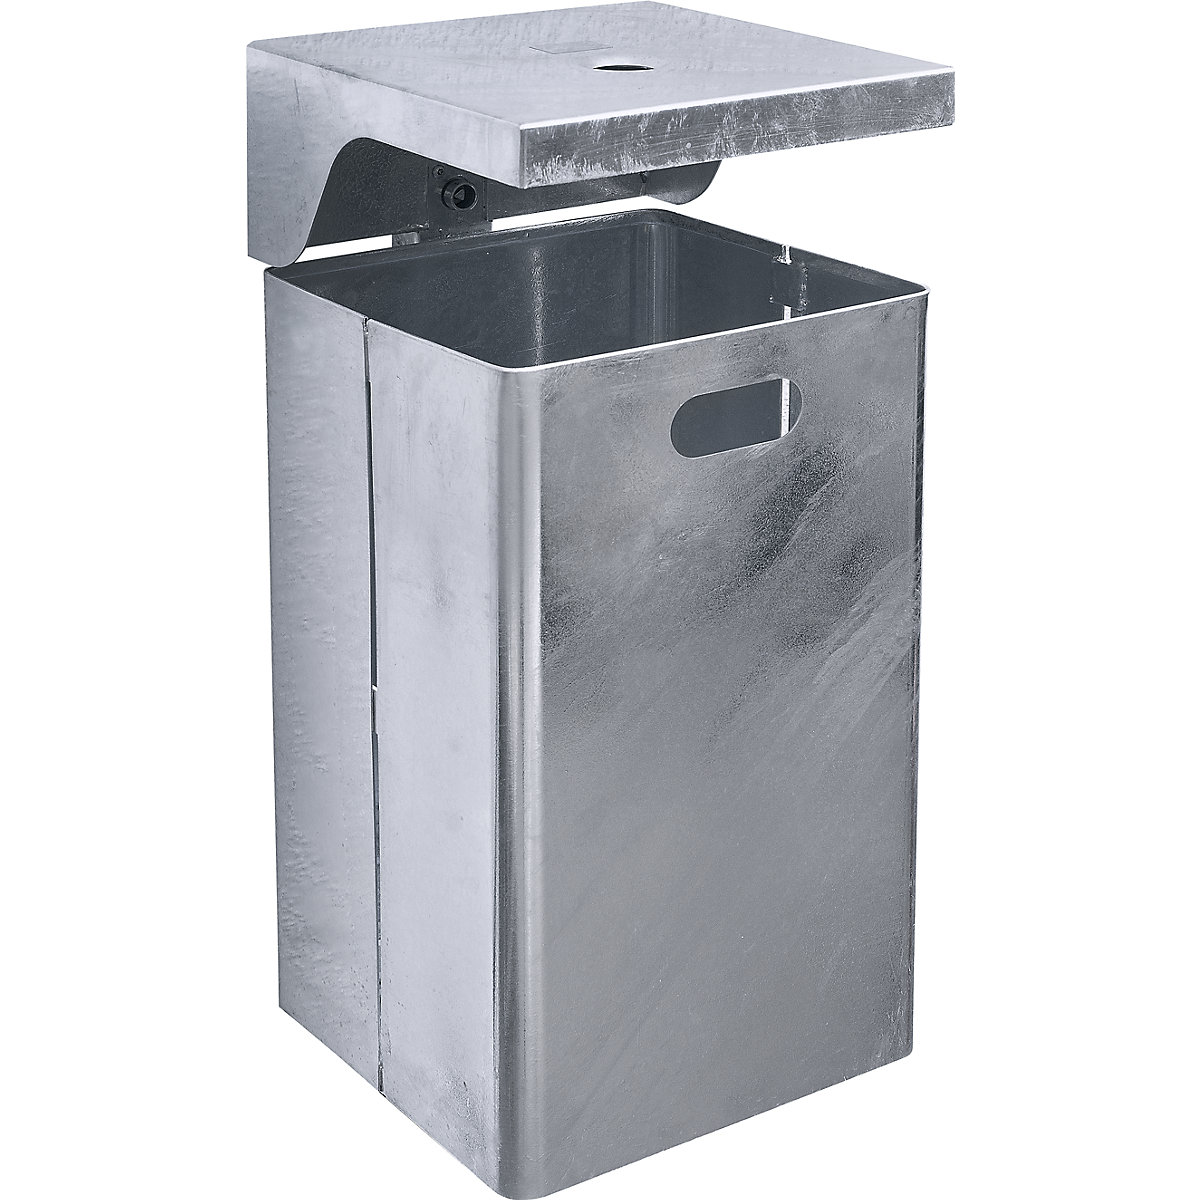 Waste collector for outdoor use, hot dip galvanised, capacity 50 l, WxHxD 310 x 685 x 360 mm, integrated ashtray-3